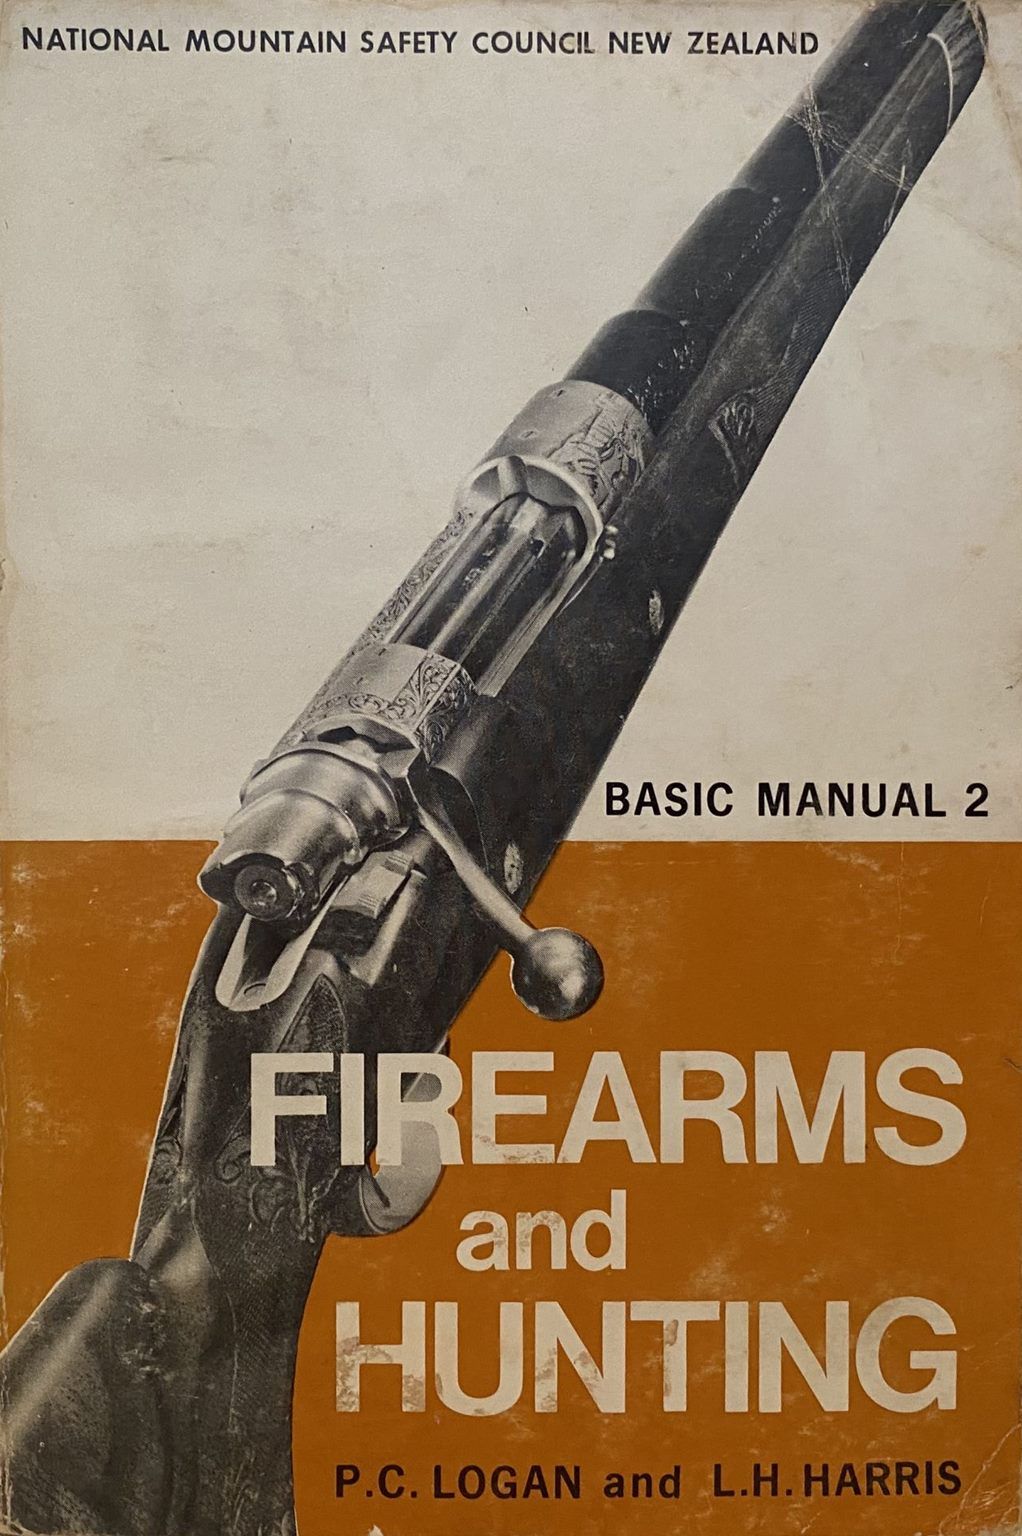 FIREARMS AND HUNTING: Basic Manual 2